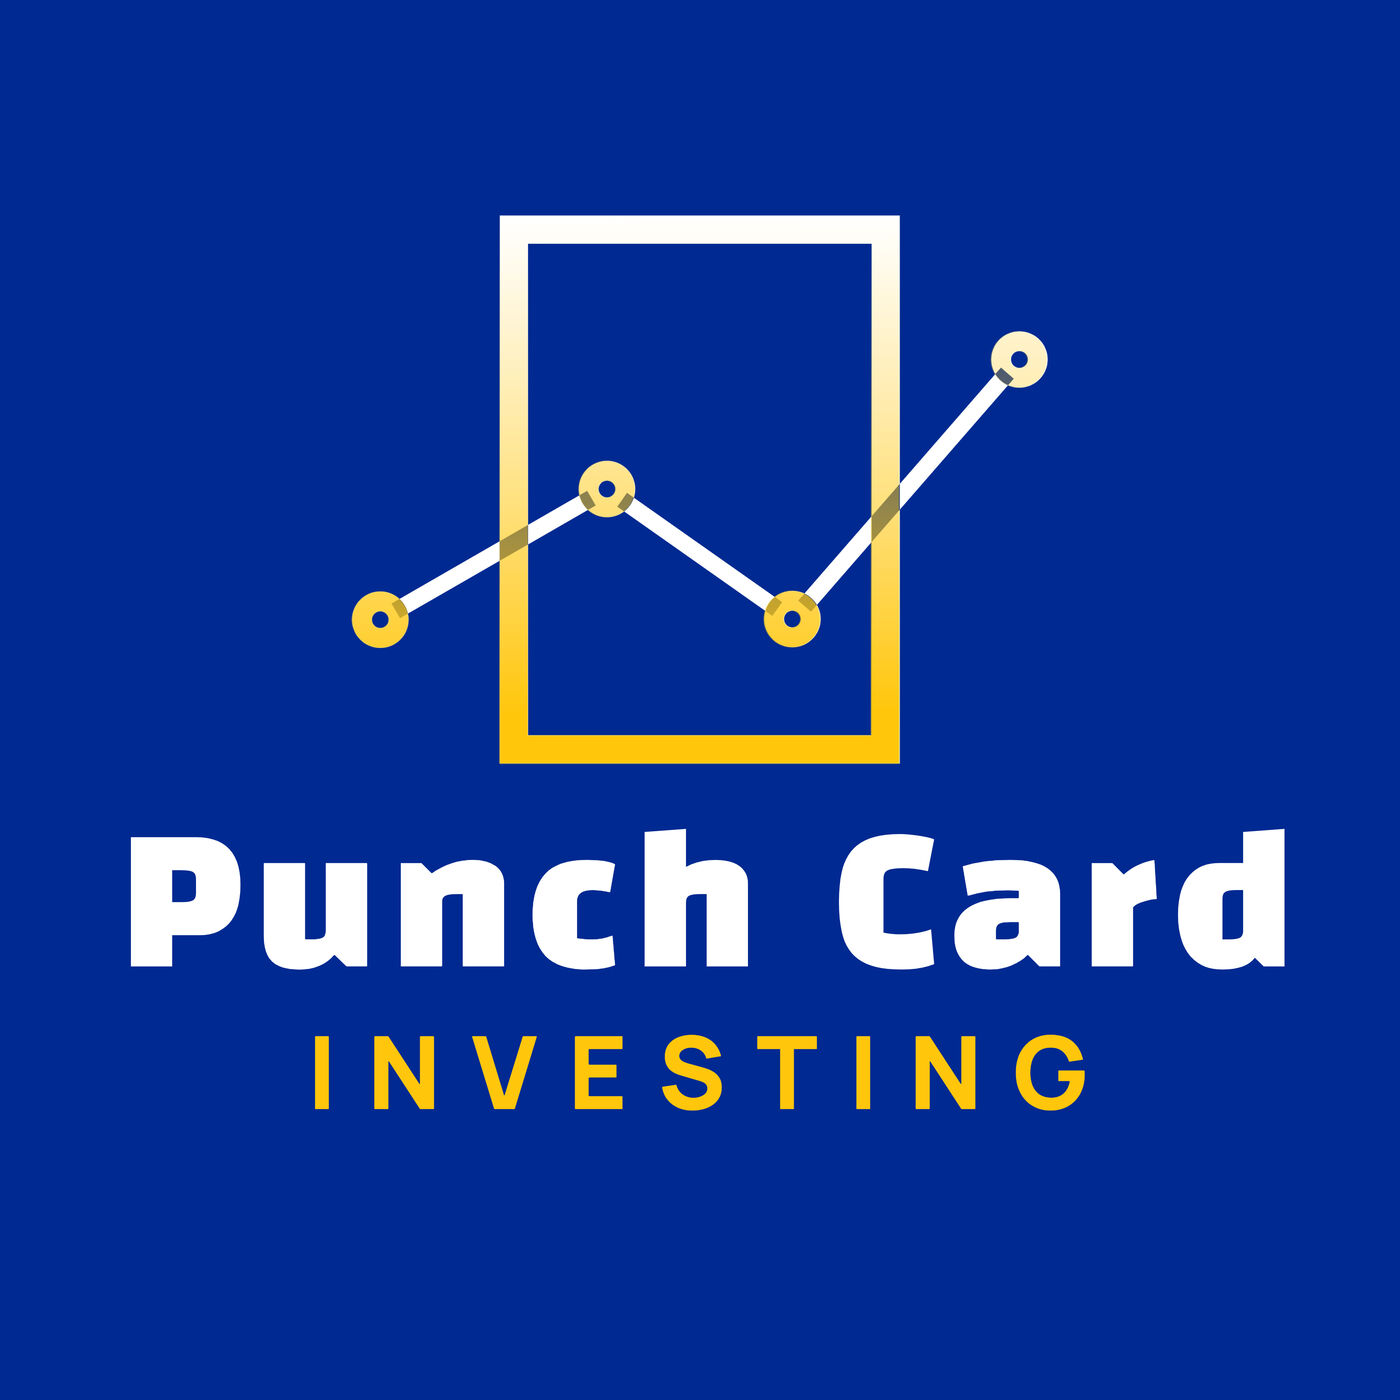 Punch card investing in the stock jim corbett sightseeing places in pattaya